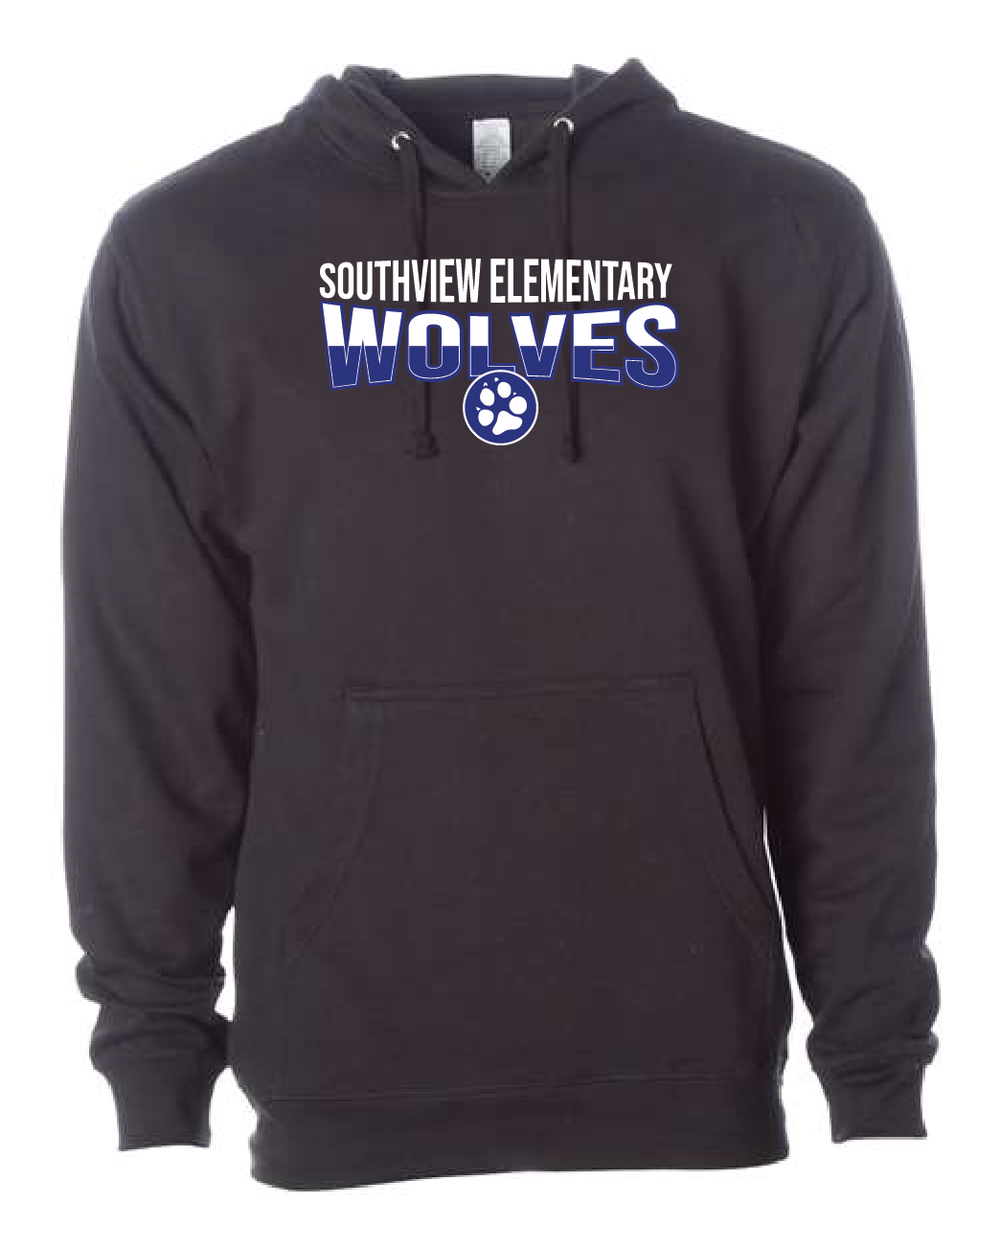 Southview - Youth & Adult Midweight Hooded Sweatshirt - SV Wolves